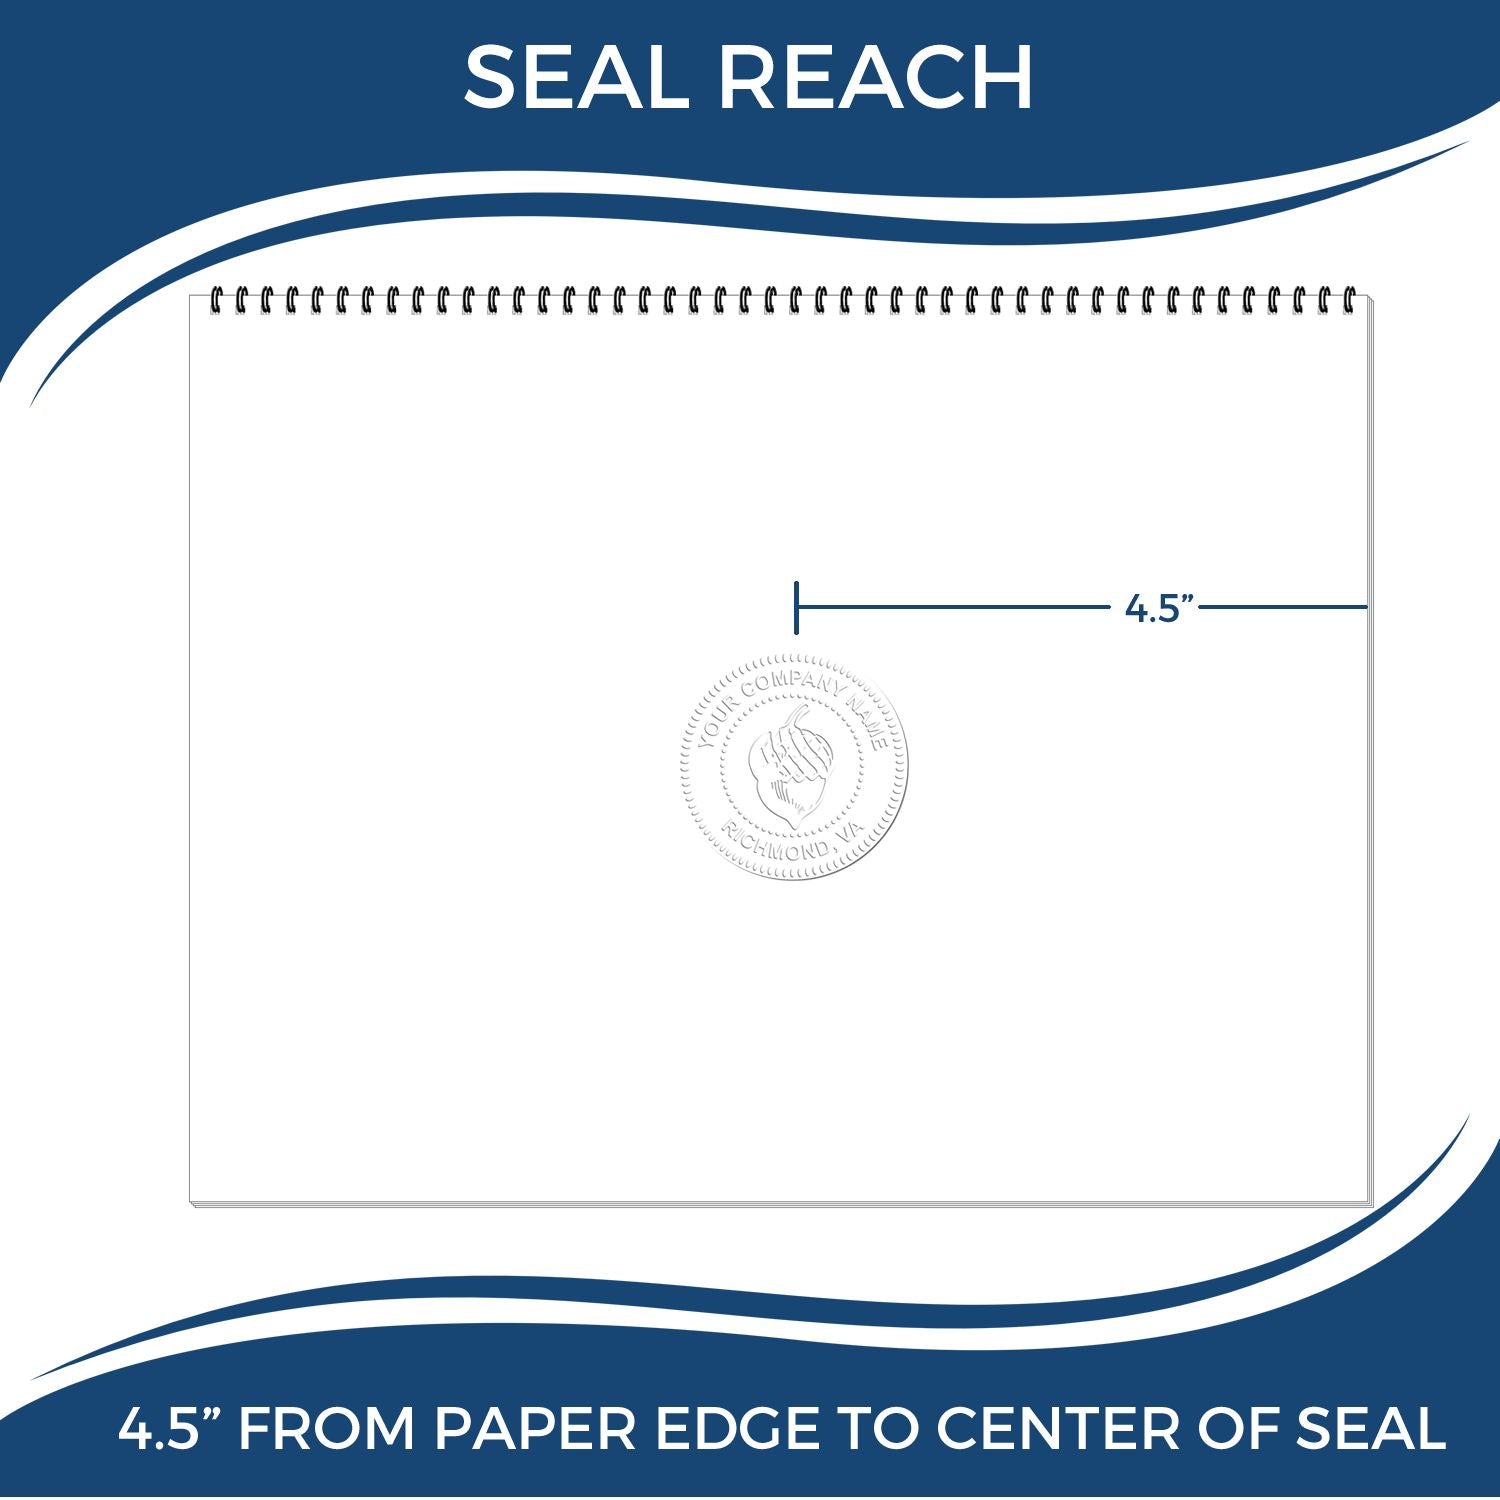 An infographic showing the seal reach which is represented by a ruler and a miniature seal image of the State of South Carolina Extended Long Reach Geologist Seal